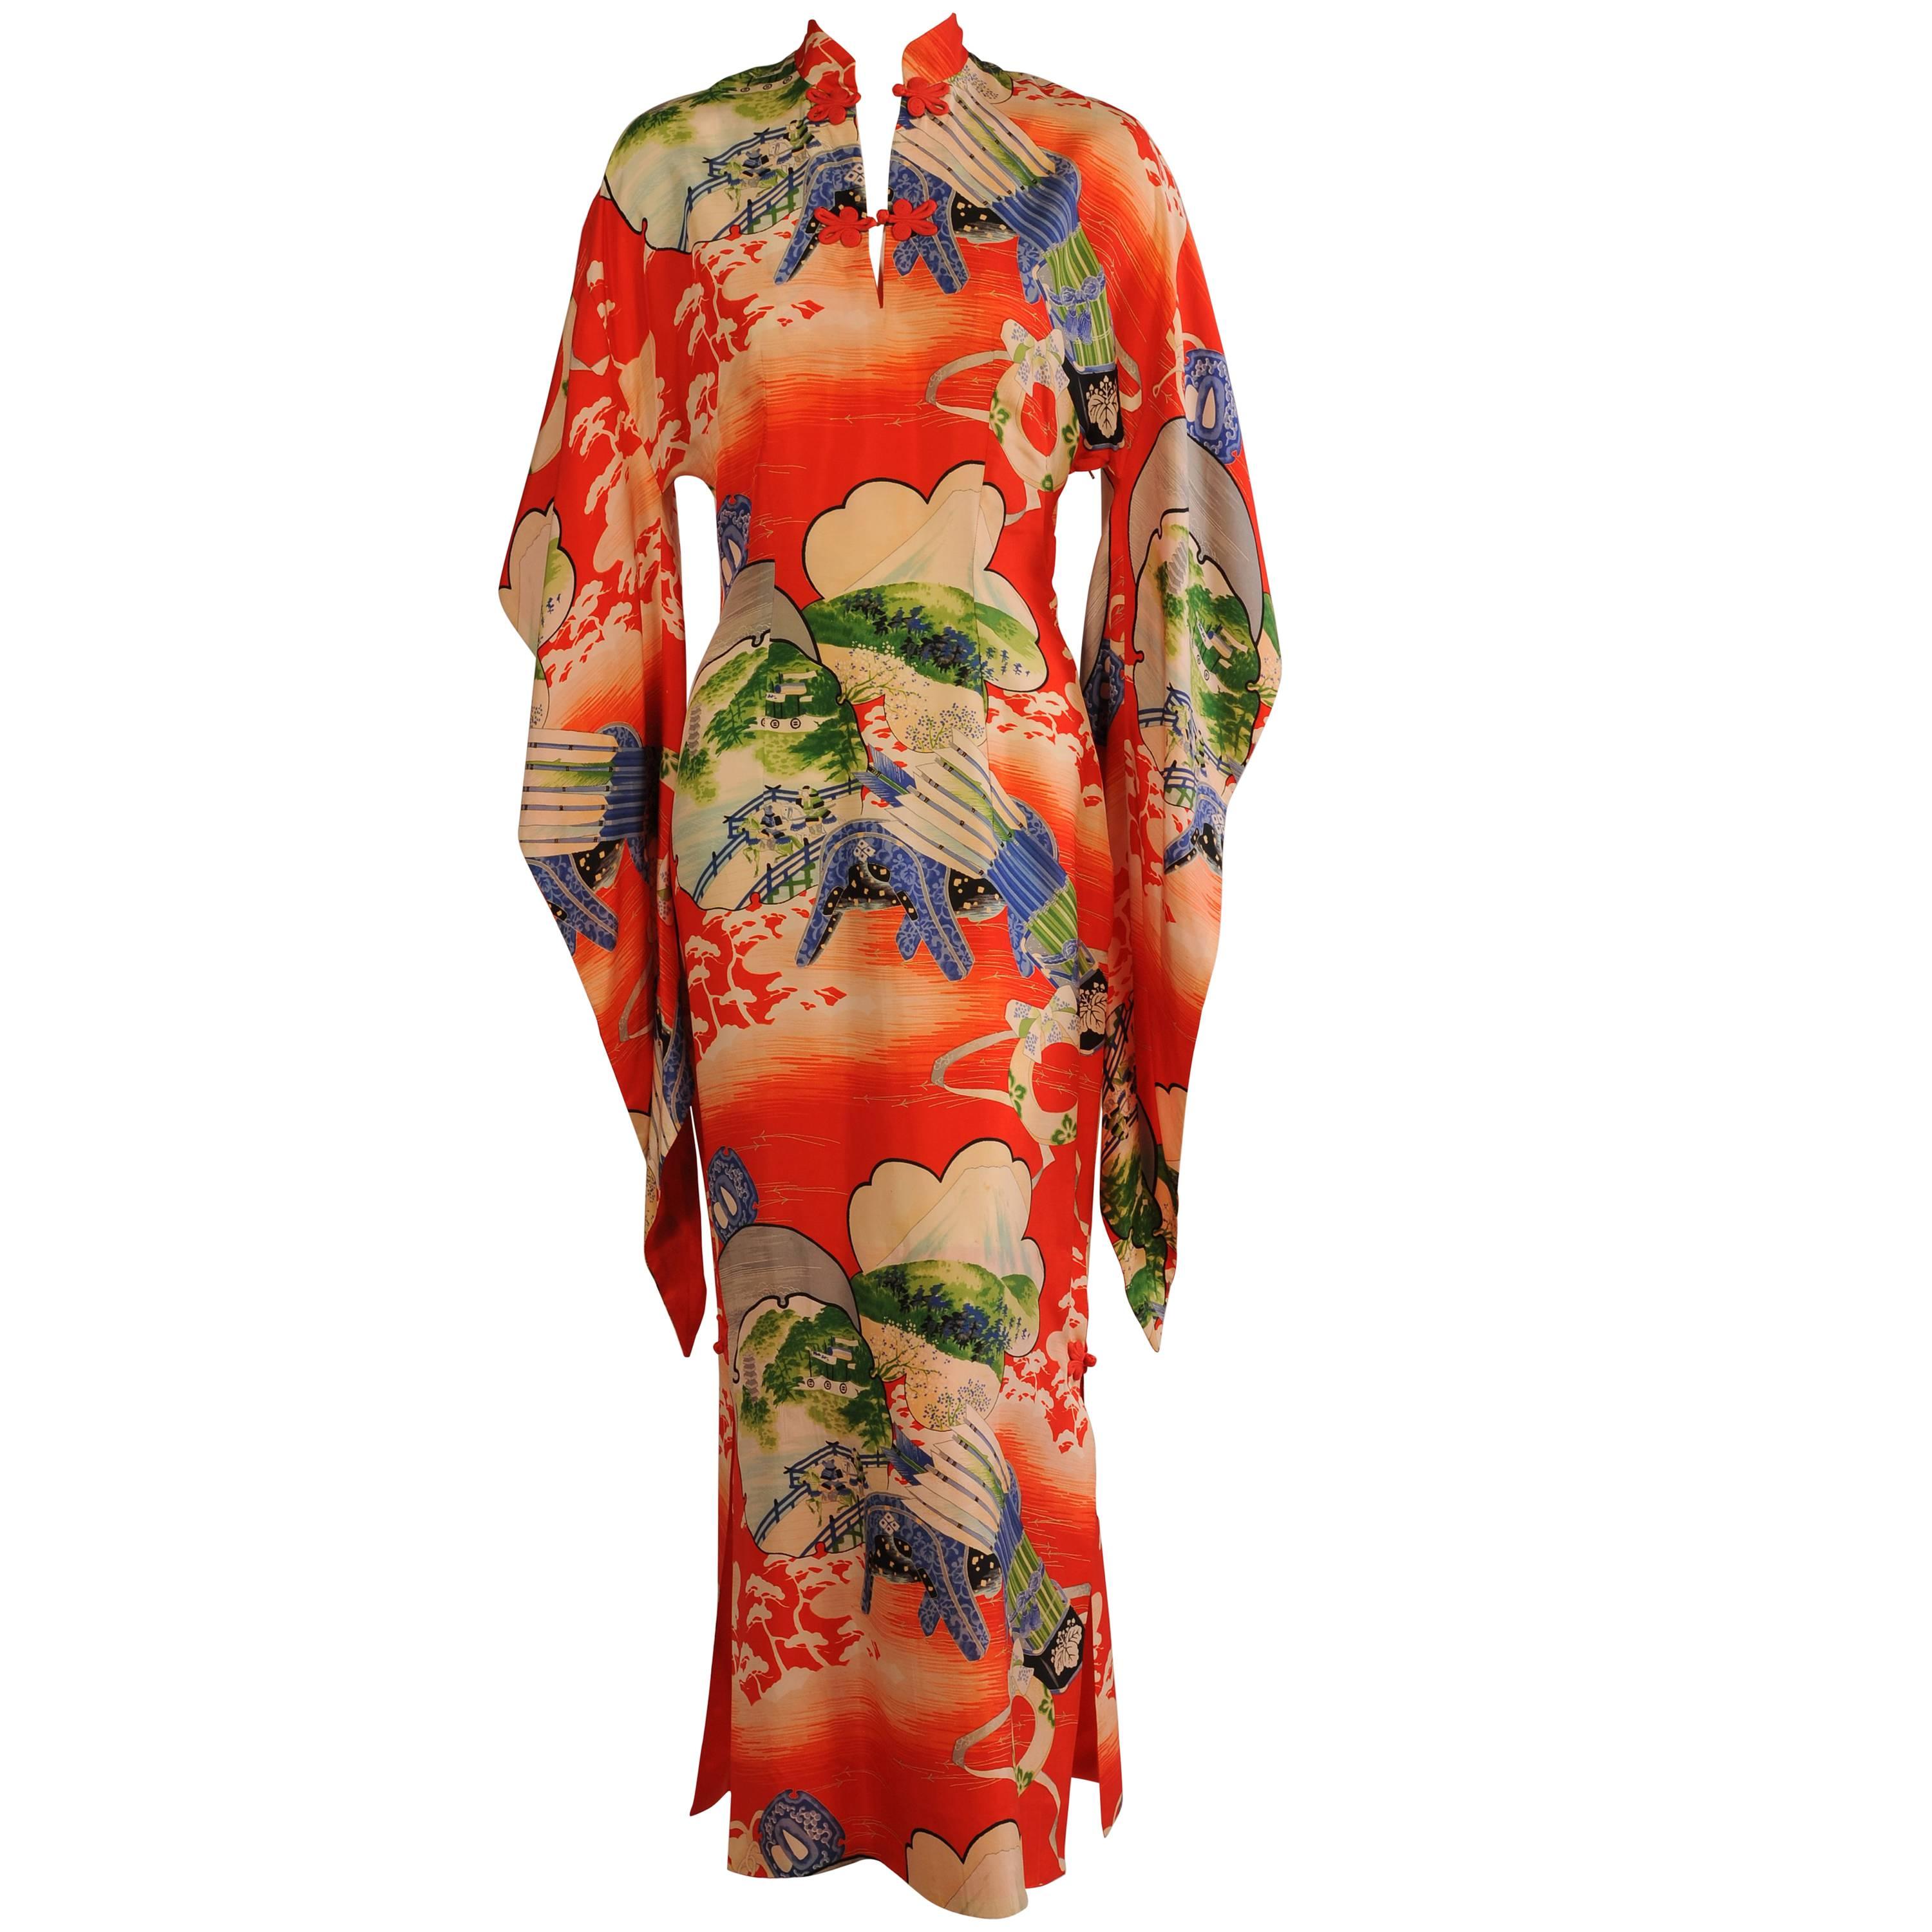 Gladys Williams Hawaiian Dress Red Silk Print with a Japanese Inspired Design